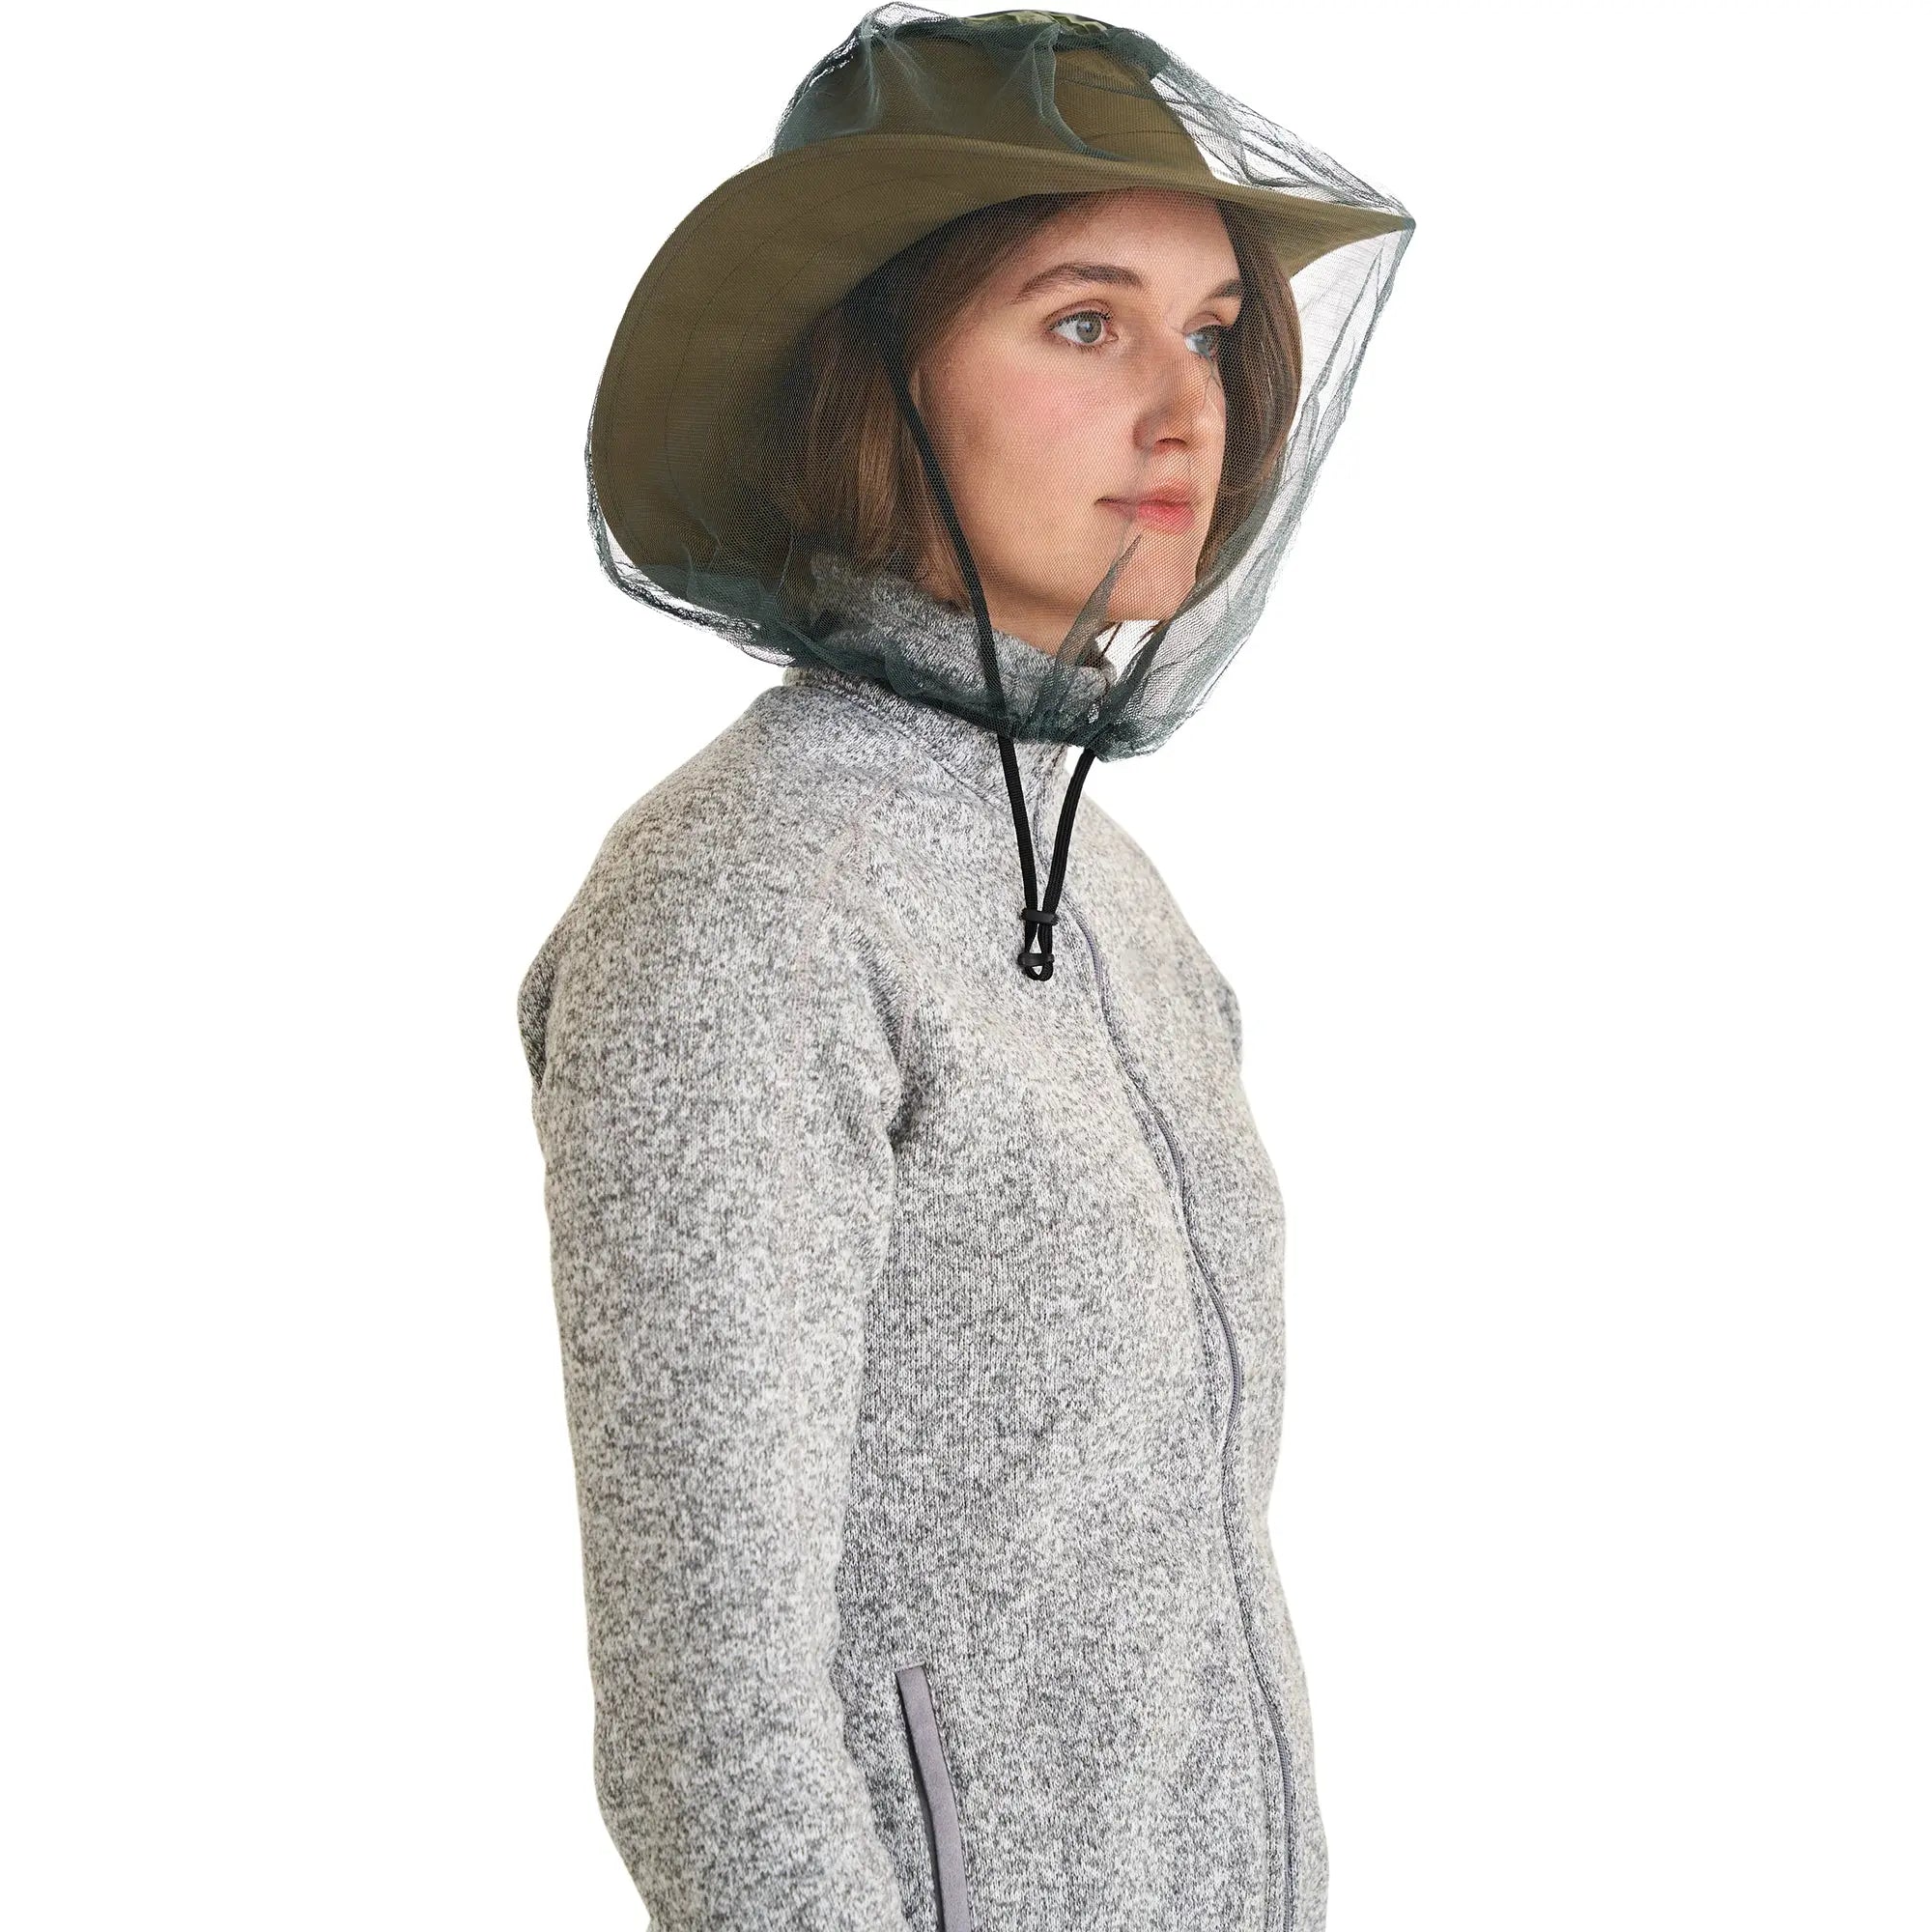 Coghlan's Mosquito Head Net for Outdoor Survival, Camping Coghlan's